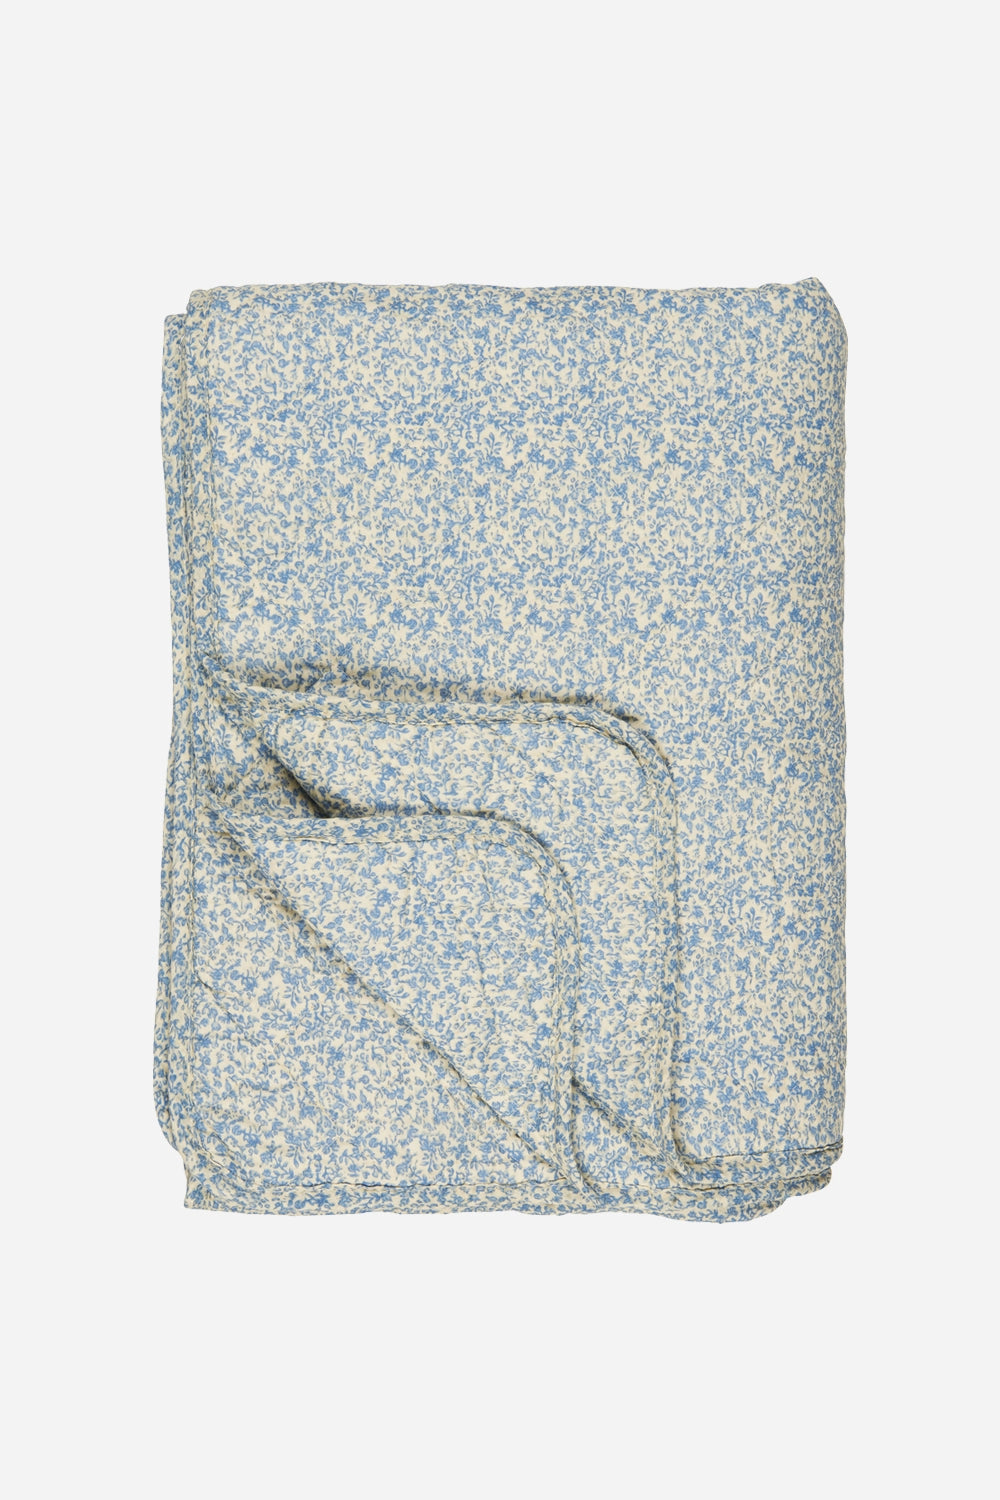 Quilted Cotton Bedspread Blue Flowers